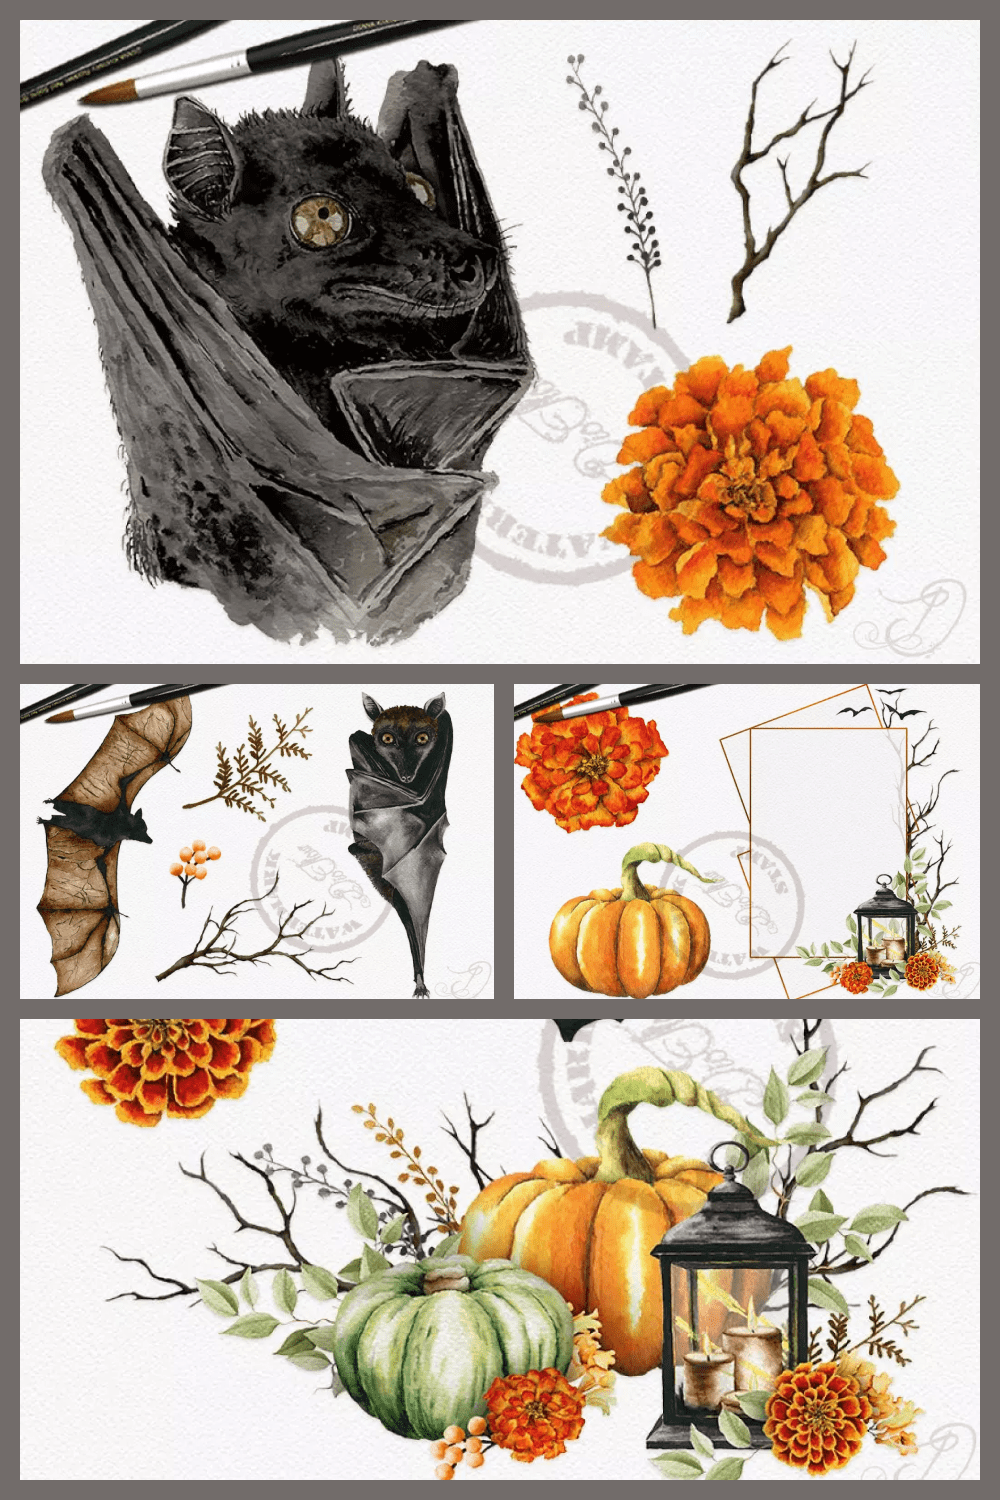 Collage of images of bats, pumpkins and orange flowers-.